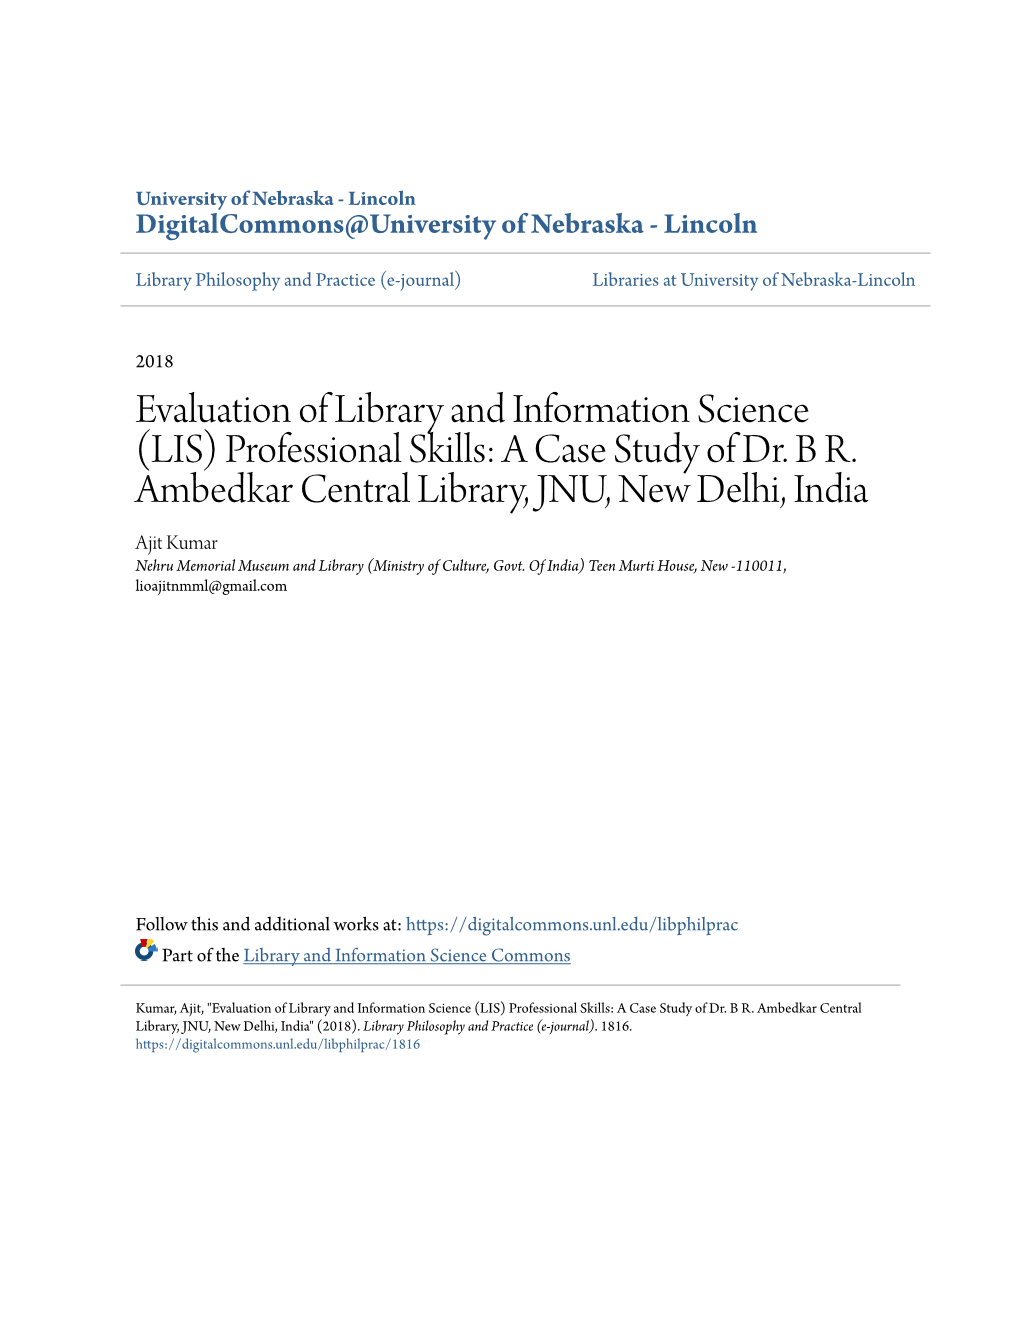 Evaluation of Library and Information Science (LIS) Professional Skills: a Case Study of Dr